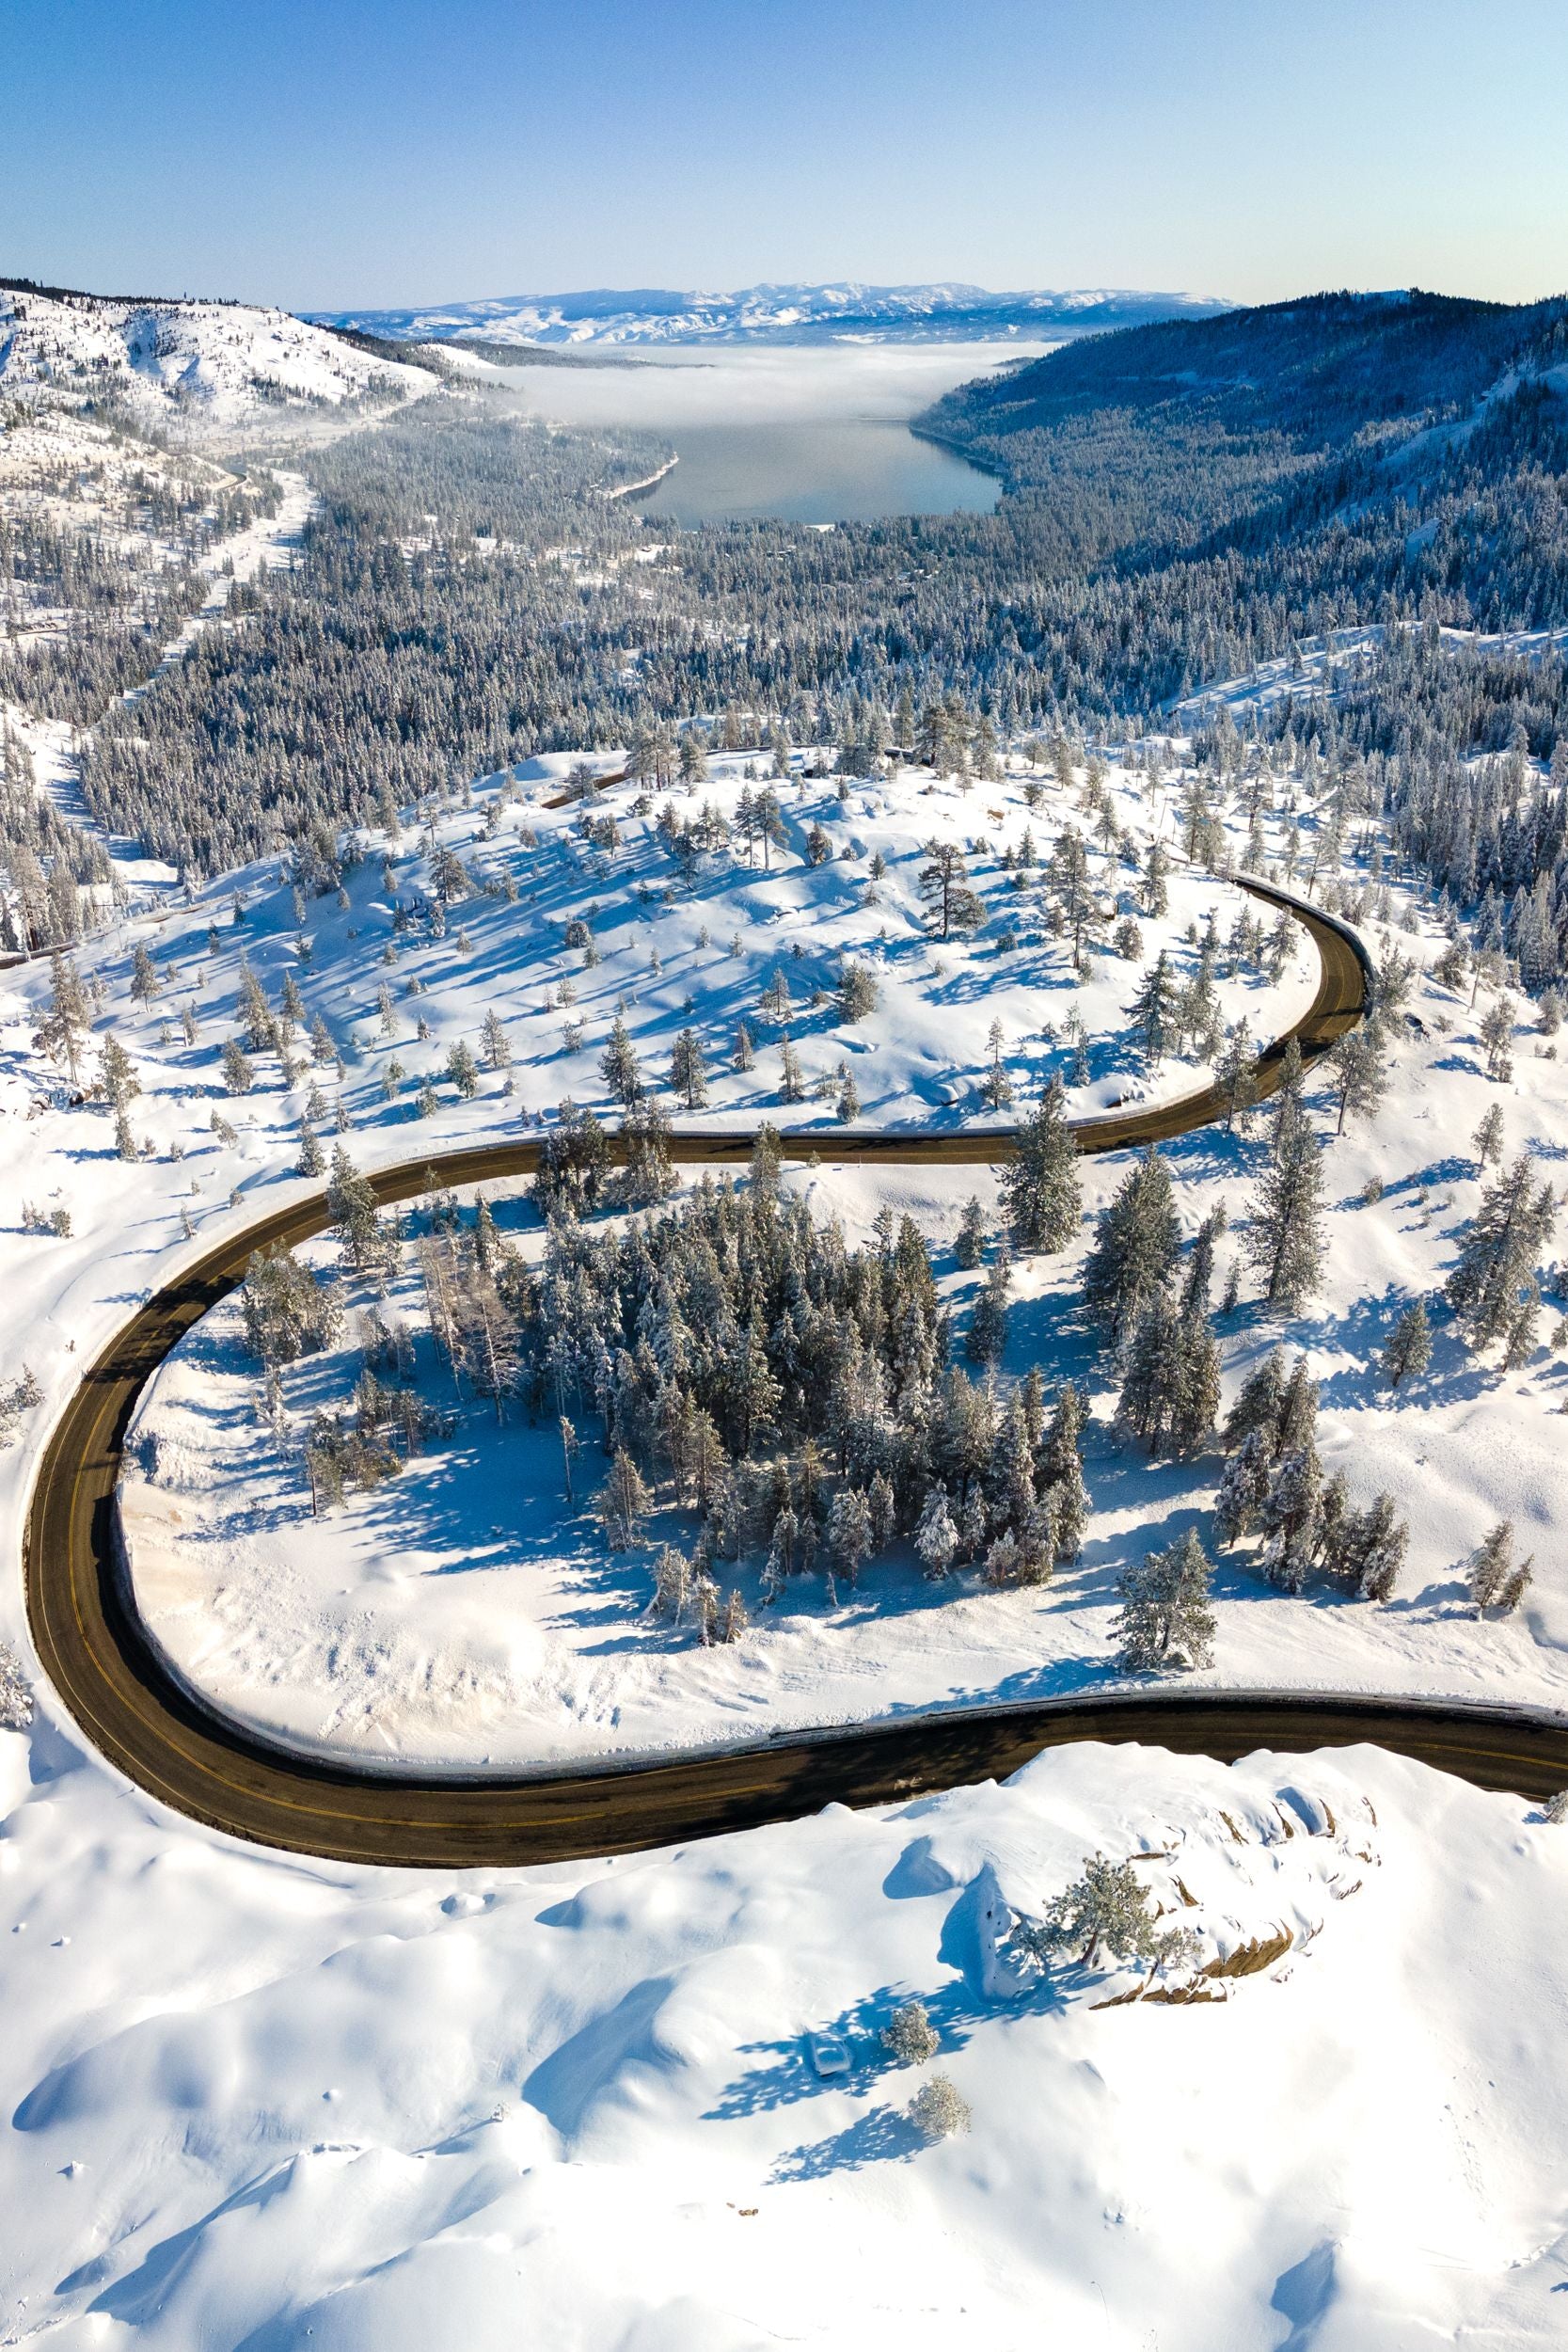 Old 40 Highway winds through snow covered hills towards a fog laden Donner Lake.